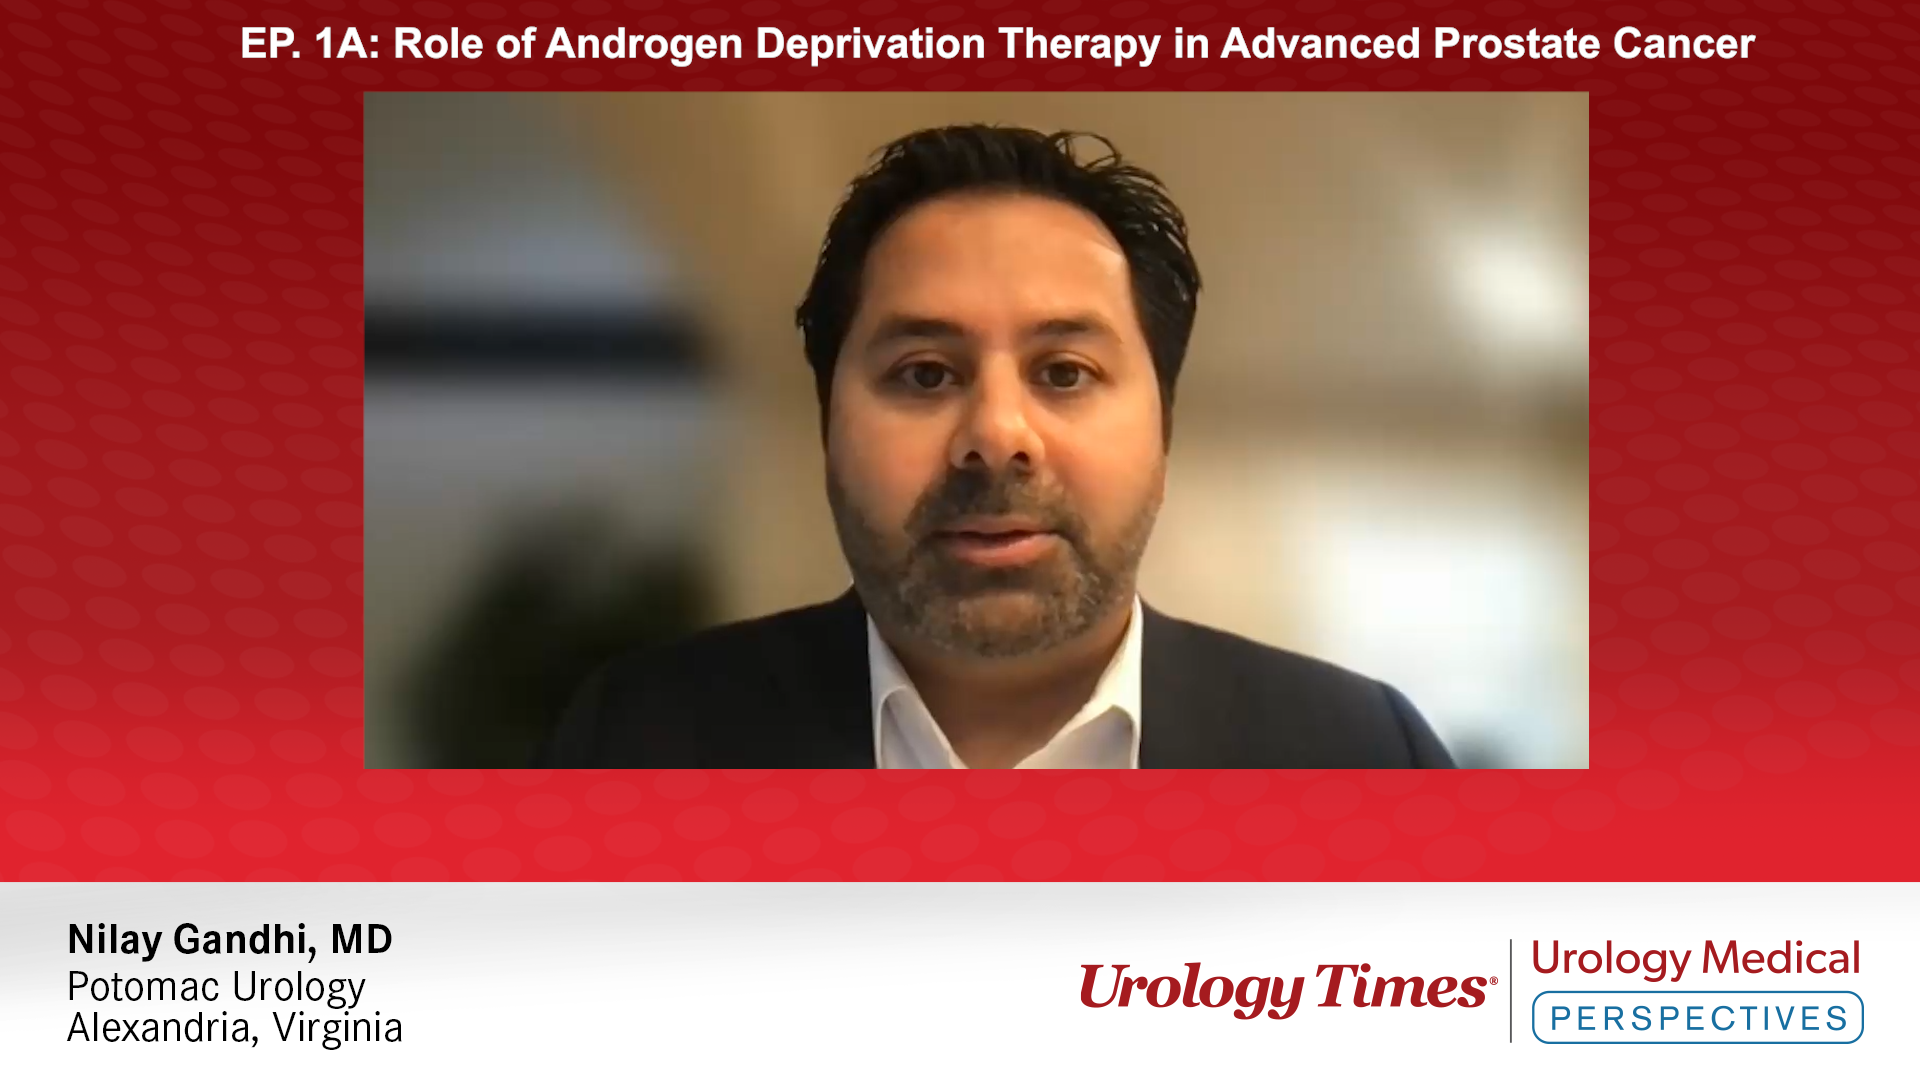 Role of Androgen Deprivation Therapy in Advanced Prostate Cancer